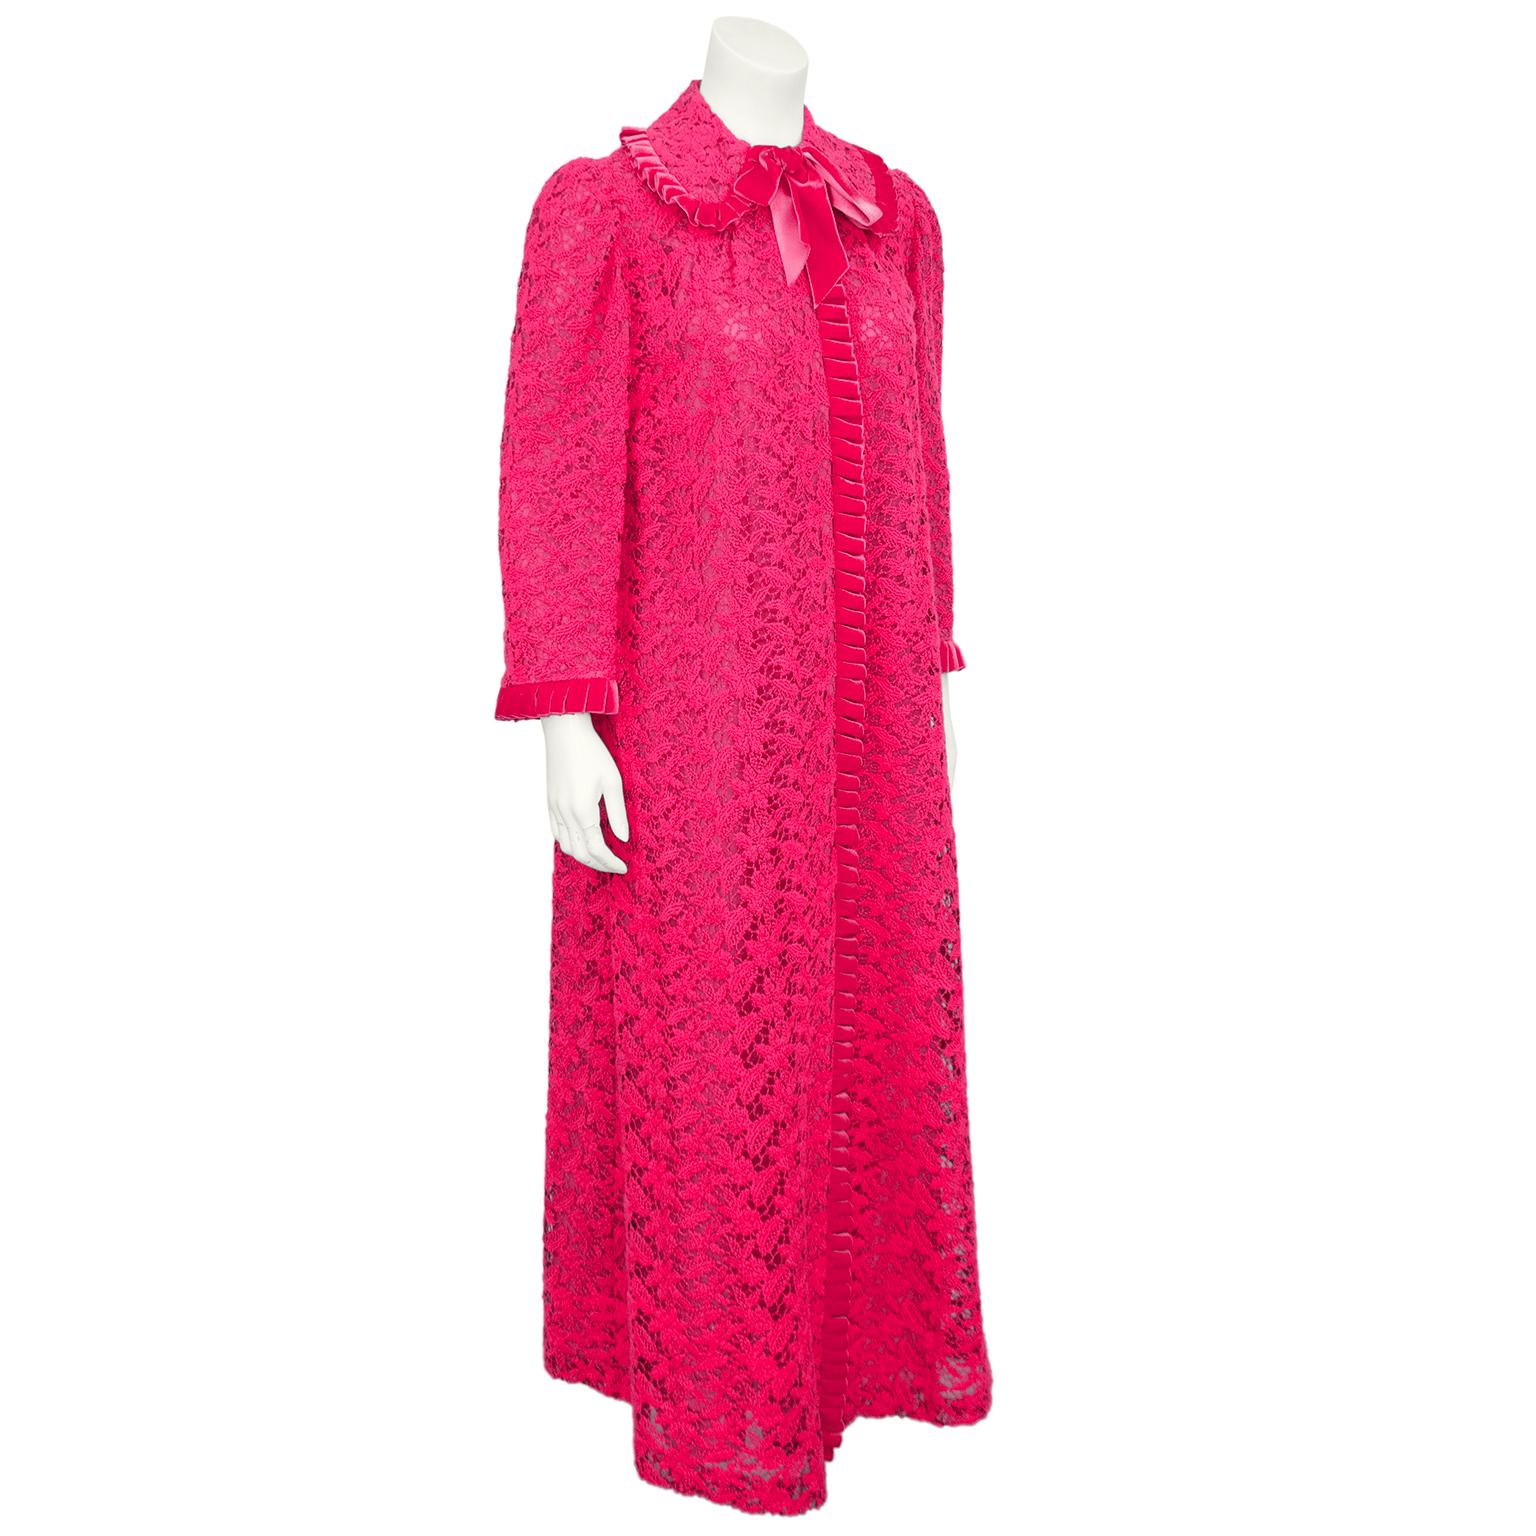 The most darling 1960s duster from Toronto's historic luxury boutique Creeds. Hot pink lace with hot pink pleated velvet trim at collar cuffs and centre seam. Further embellished with a matching hot pink velvet tie at centre of the peter pan collar.